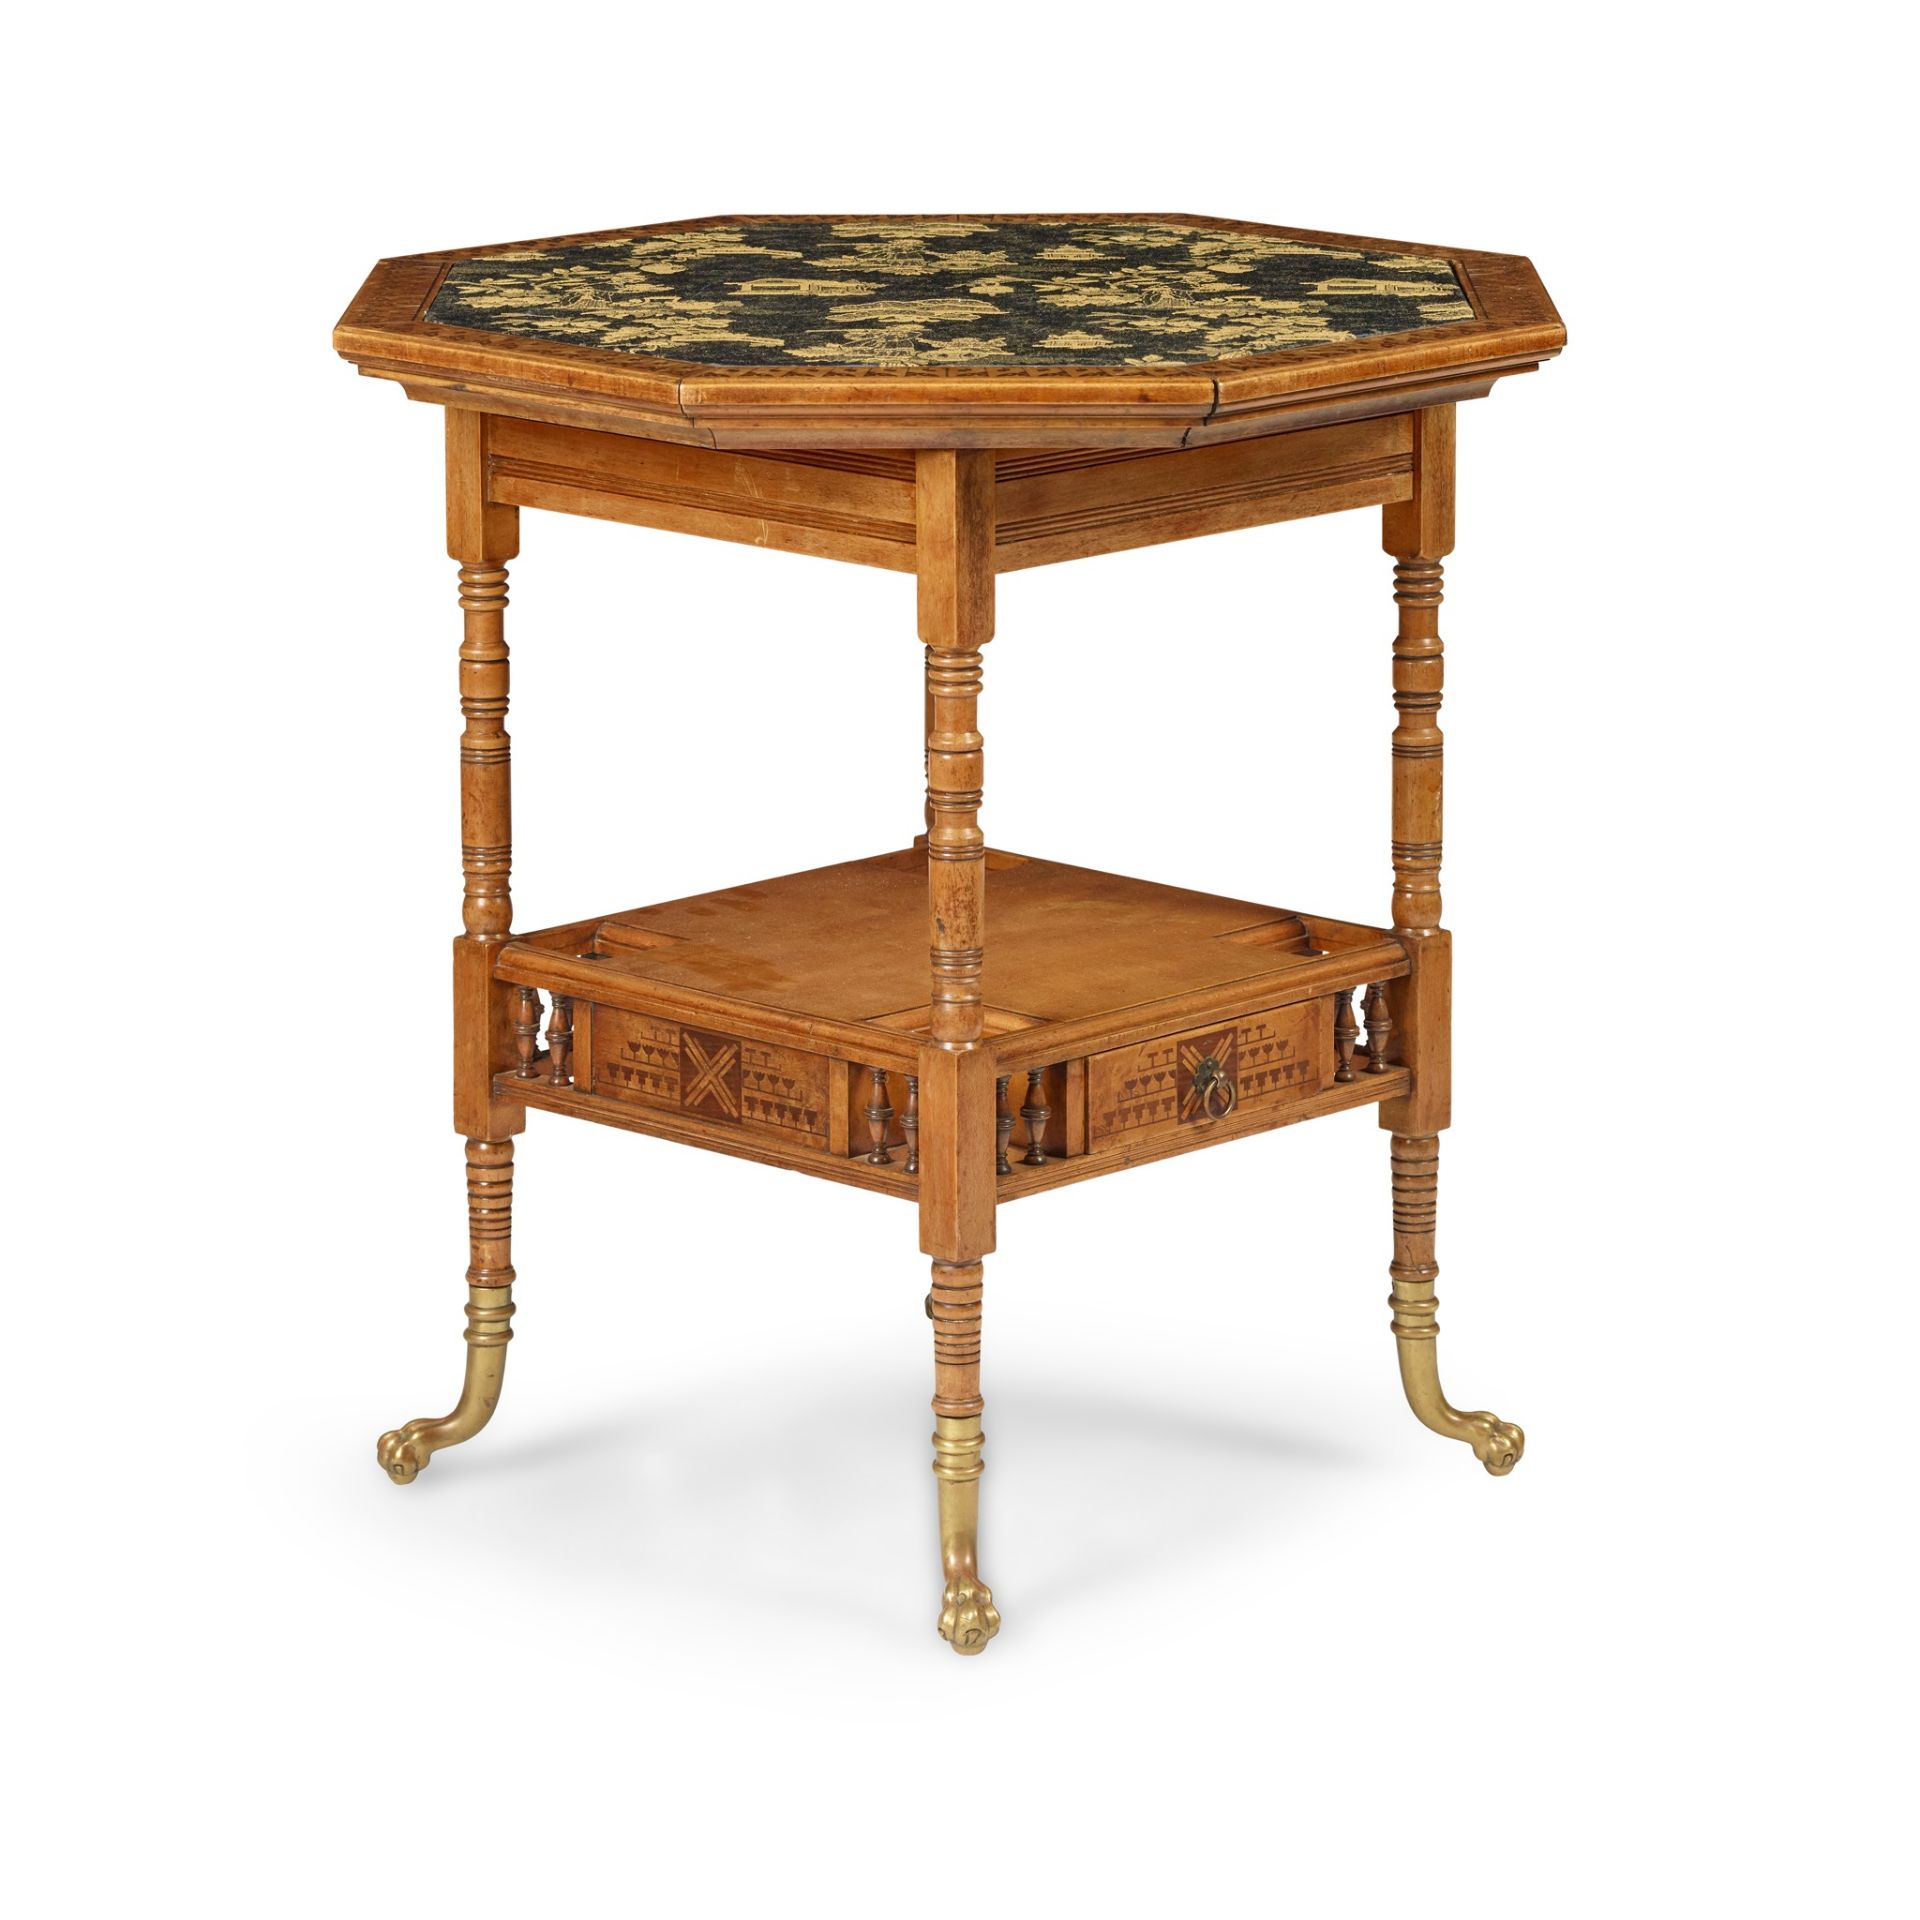 AMERICAN, MANNER OF E. W. GODWIN AESTHETIC MOVEMENT GAMES TABLE, CIRCA 1880